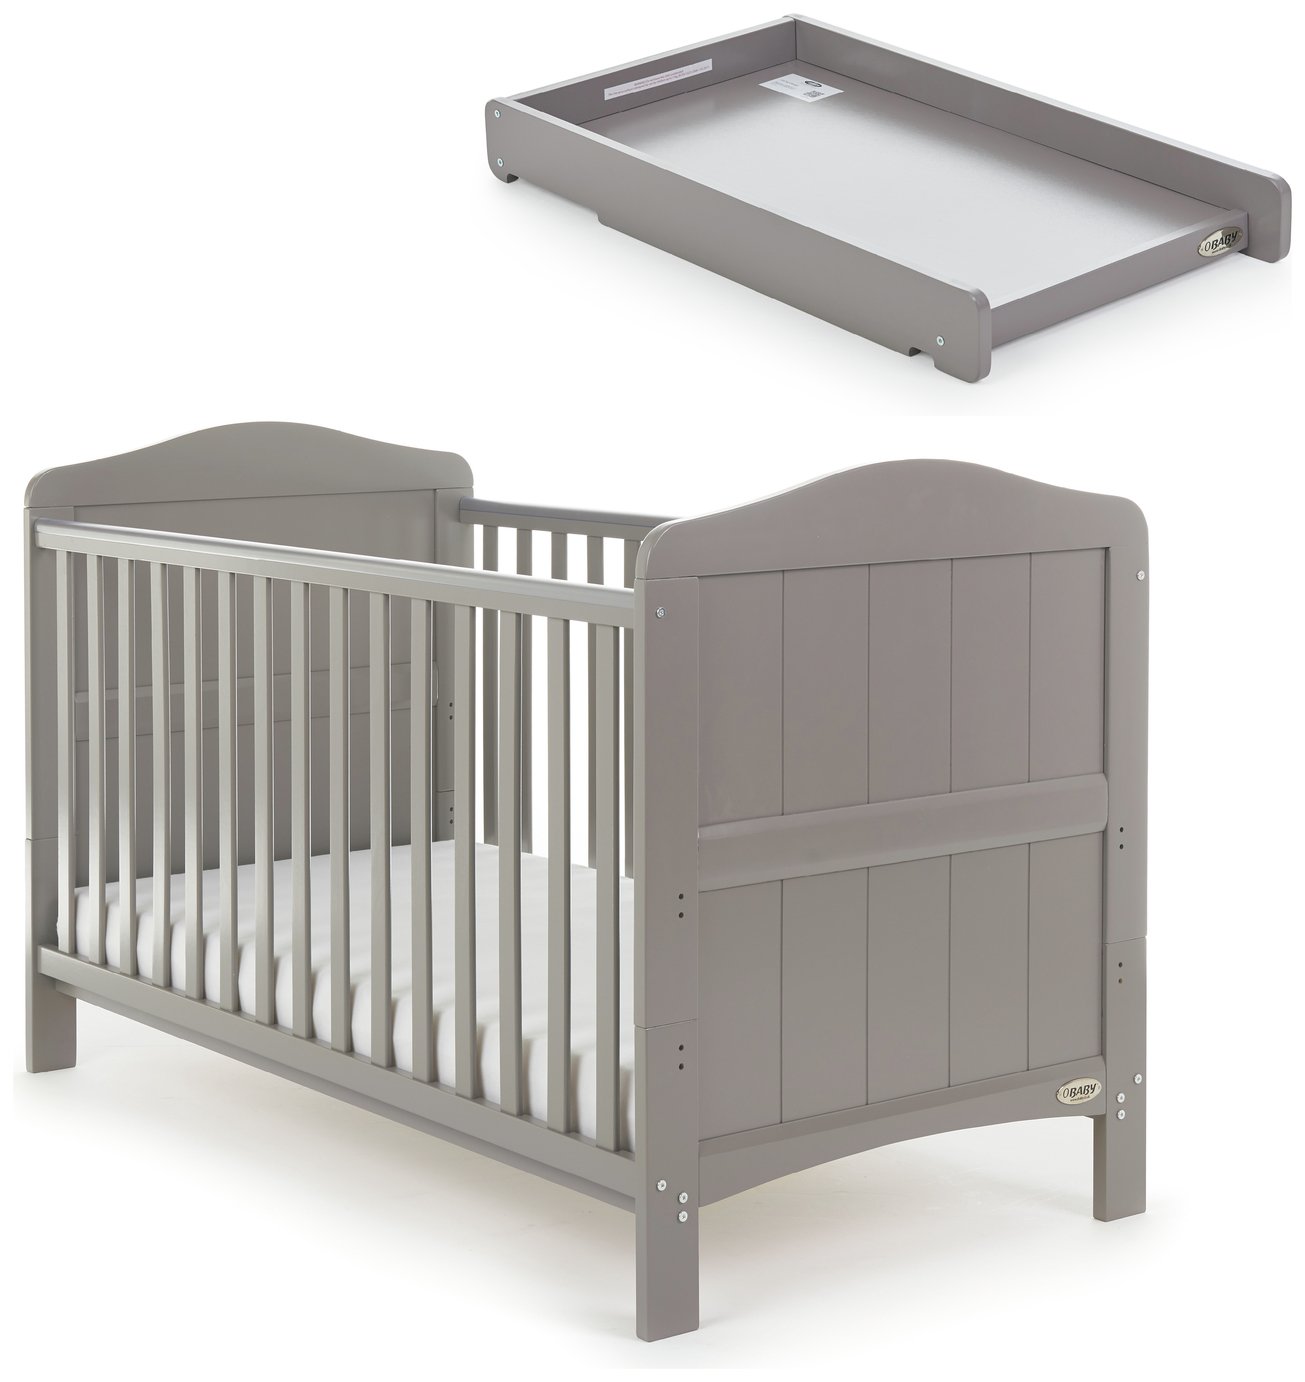 Obaby Whitby Cot Bed & Cot Top Changer - Taupe Grey